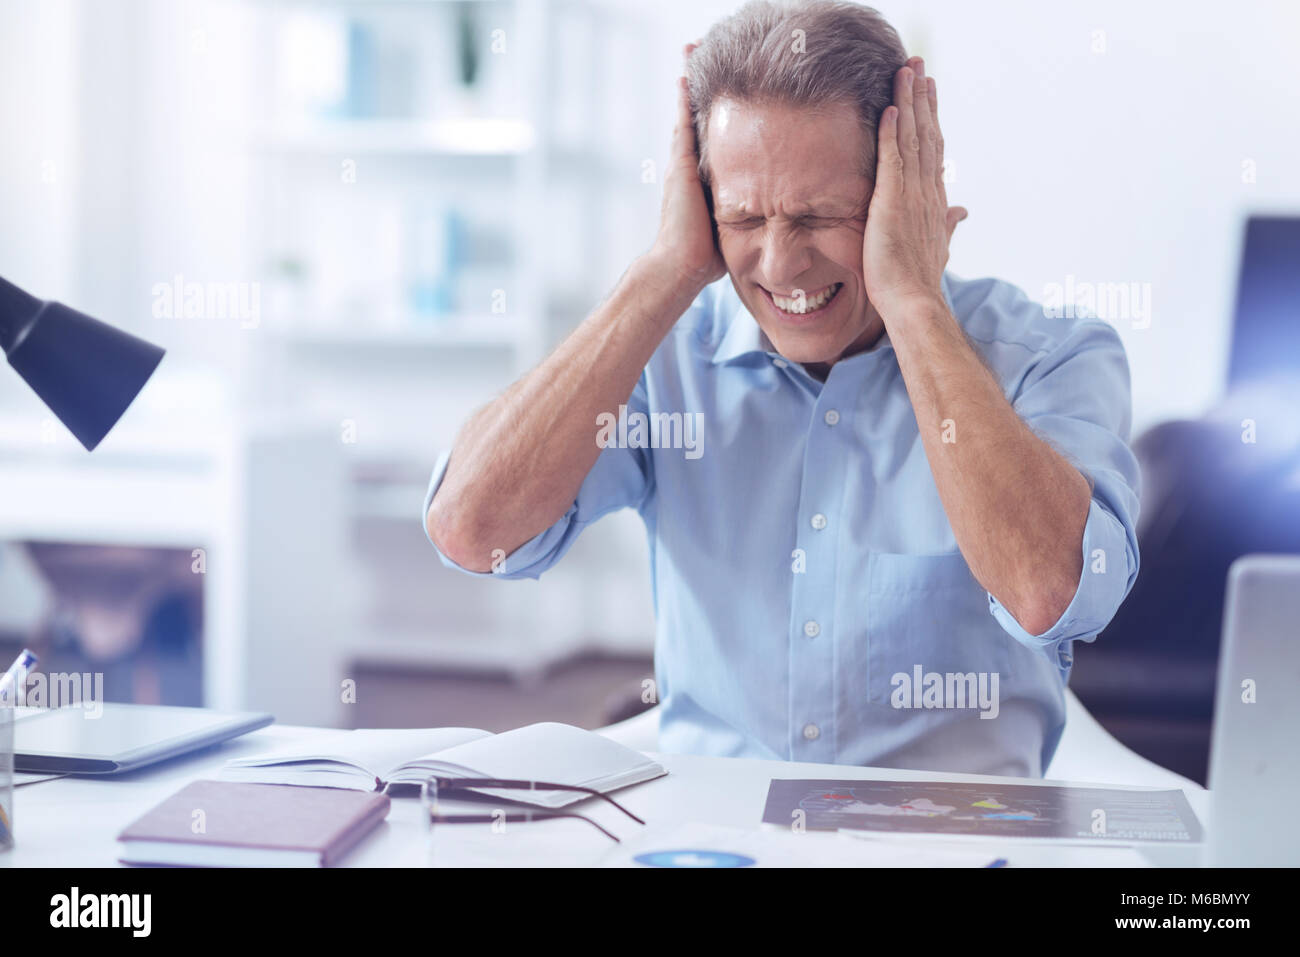 Unhappy stressed out man covering his ears Stock Photo